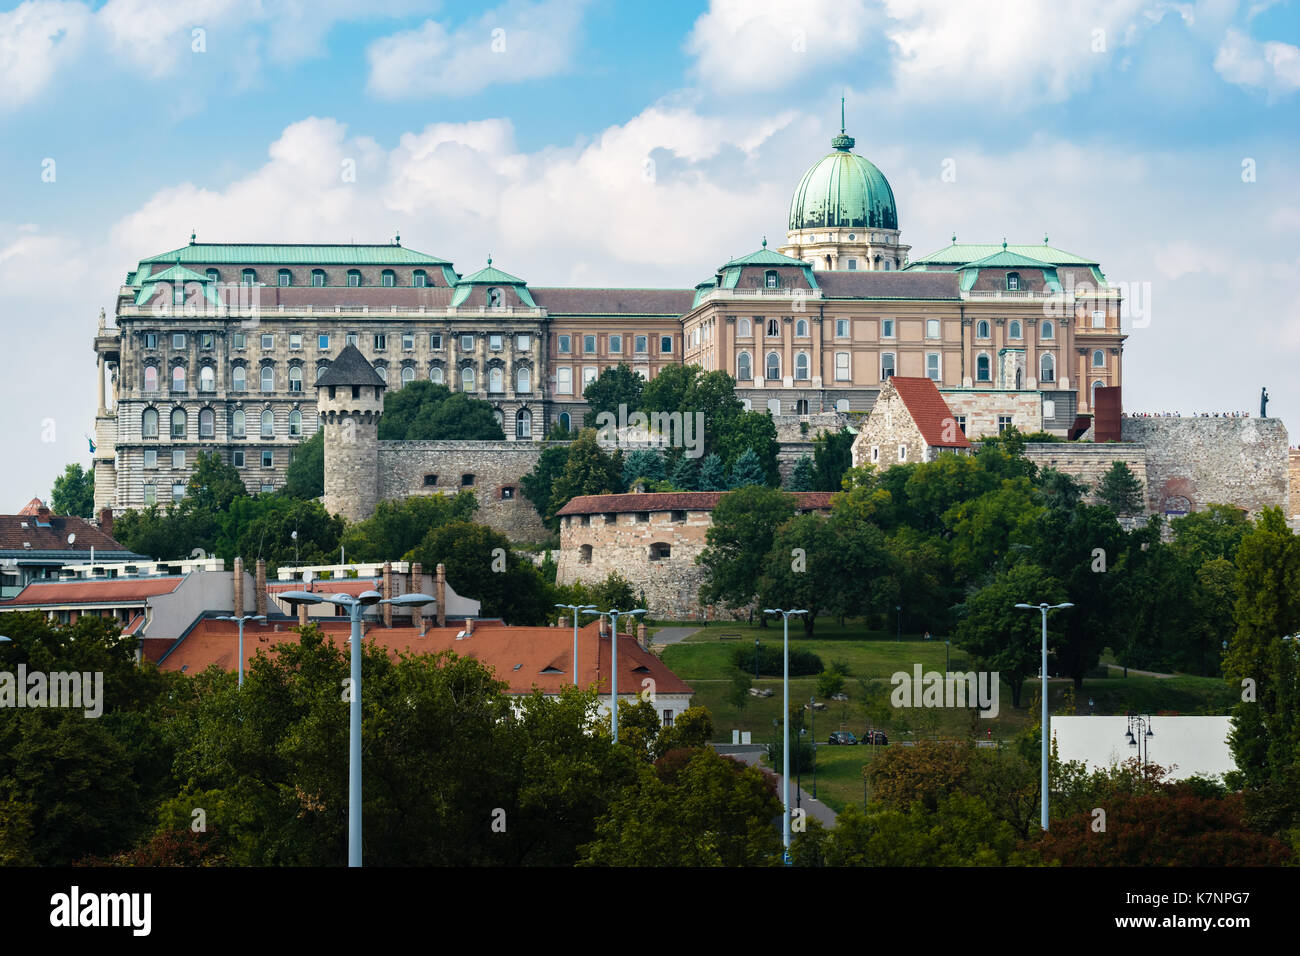 Image of the Buda Castle, or also called Royal Palace or Royal Castle in Budapest in Hungary on a beautiful day with blue sky and a few clouds. Stock Photo